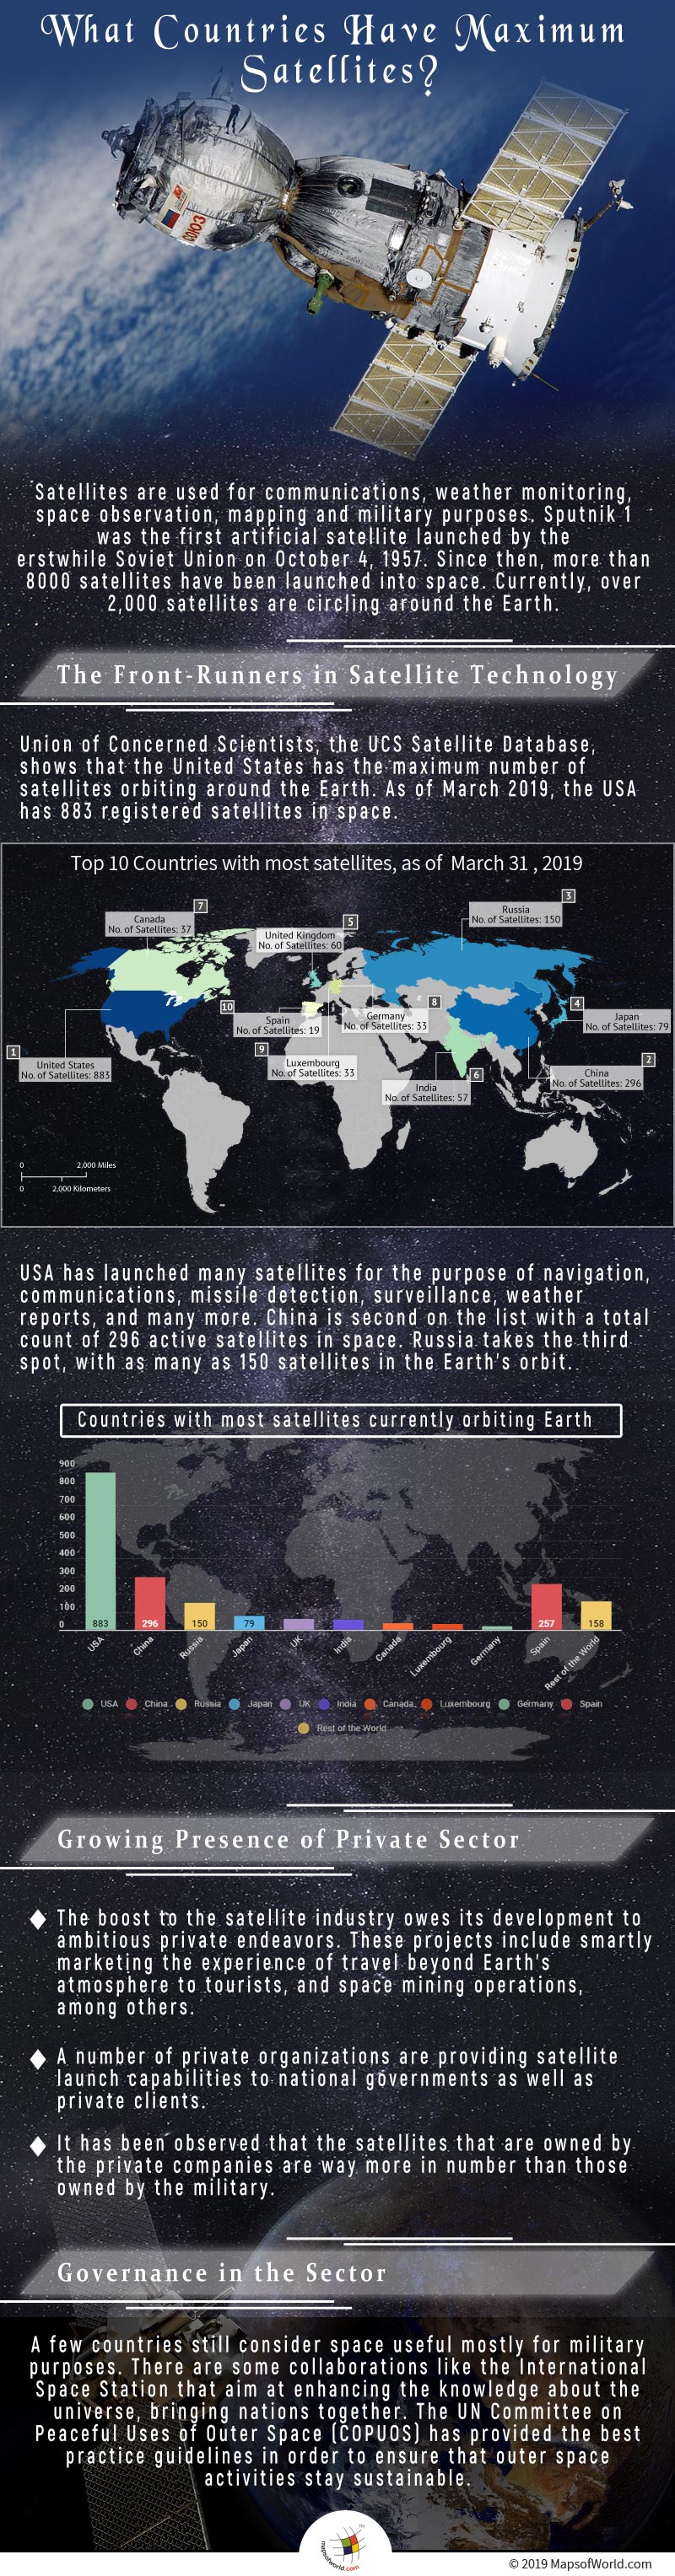 Infographic Giving Details on Countries having Maximum Satellites